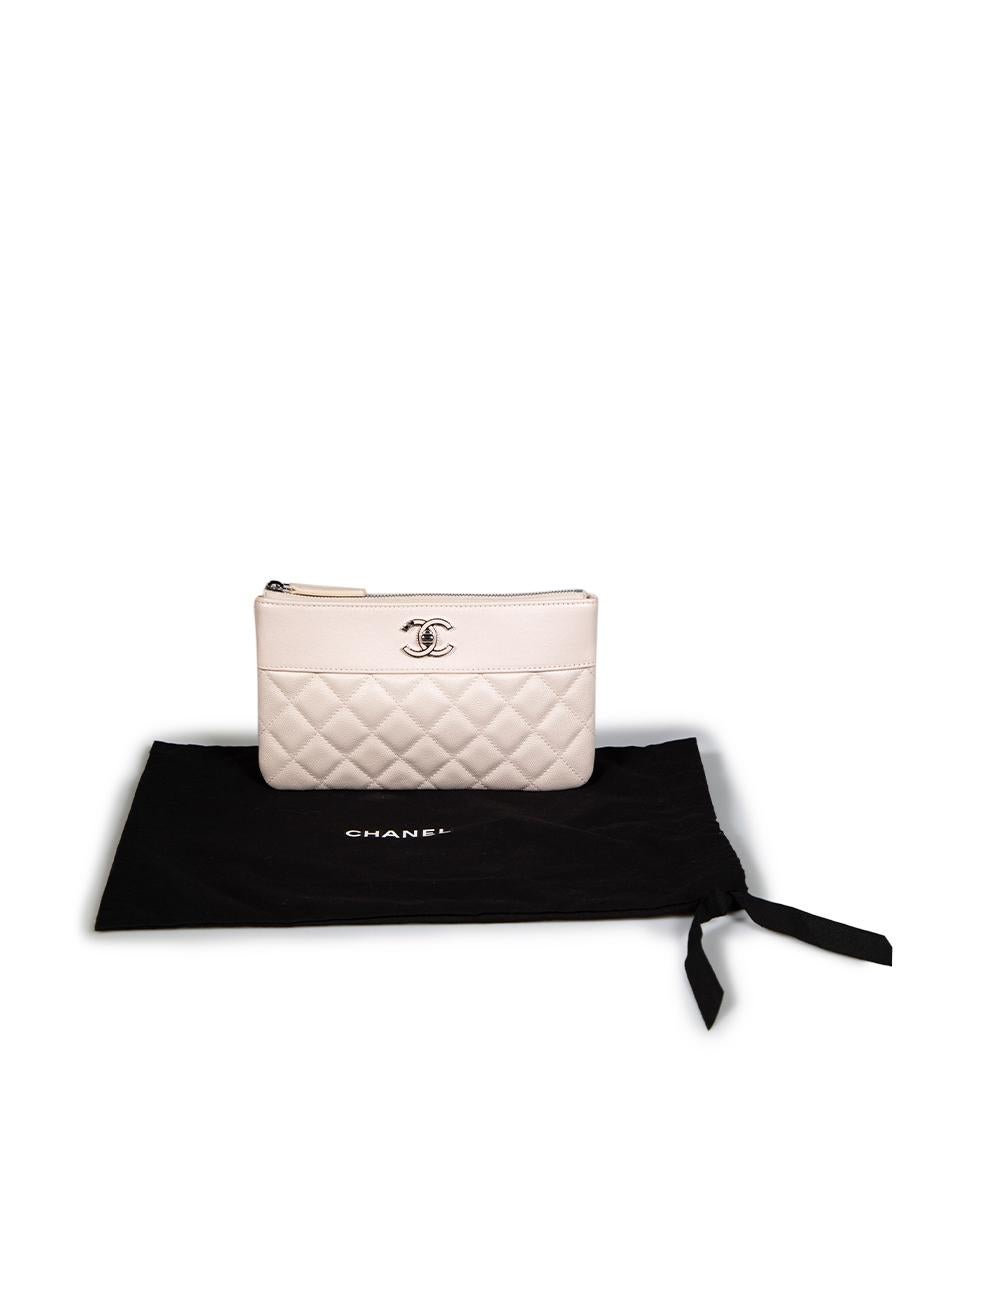 Chanel 2020 Pink Caviar Leather Interlocking CC Quilted Zip Clutch For Sale 4